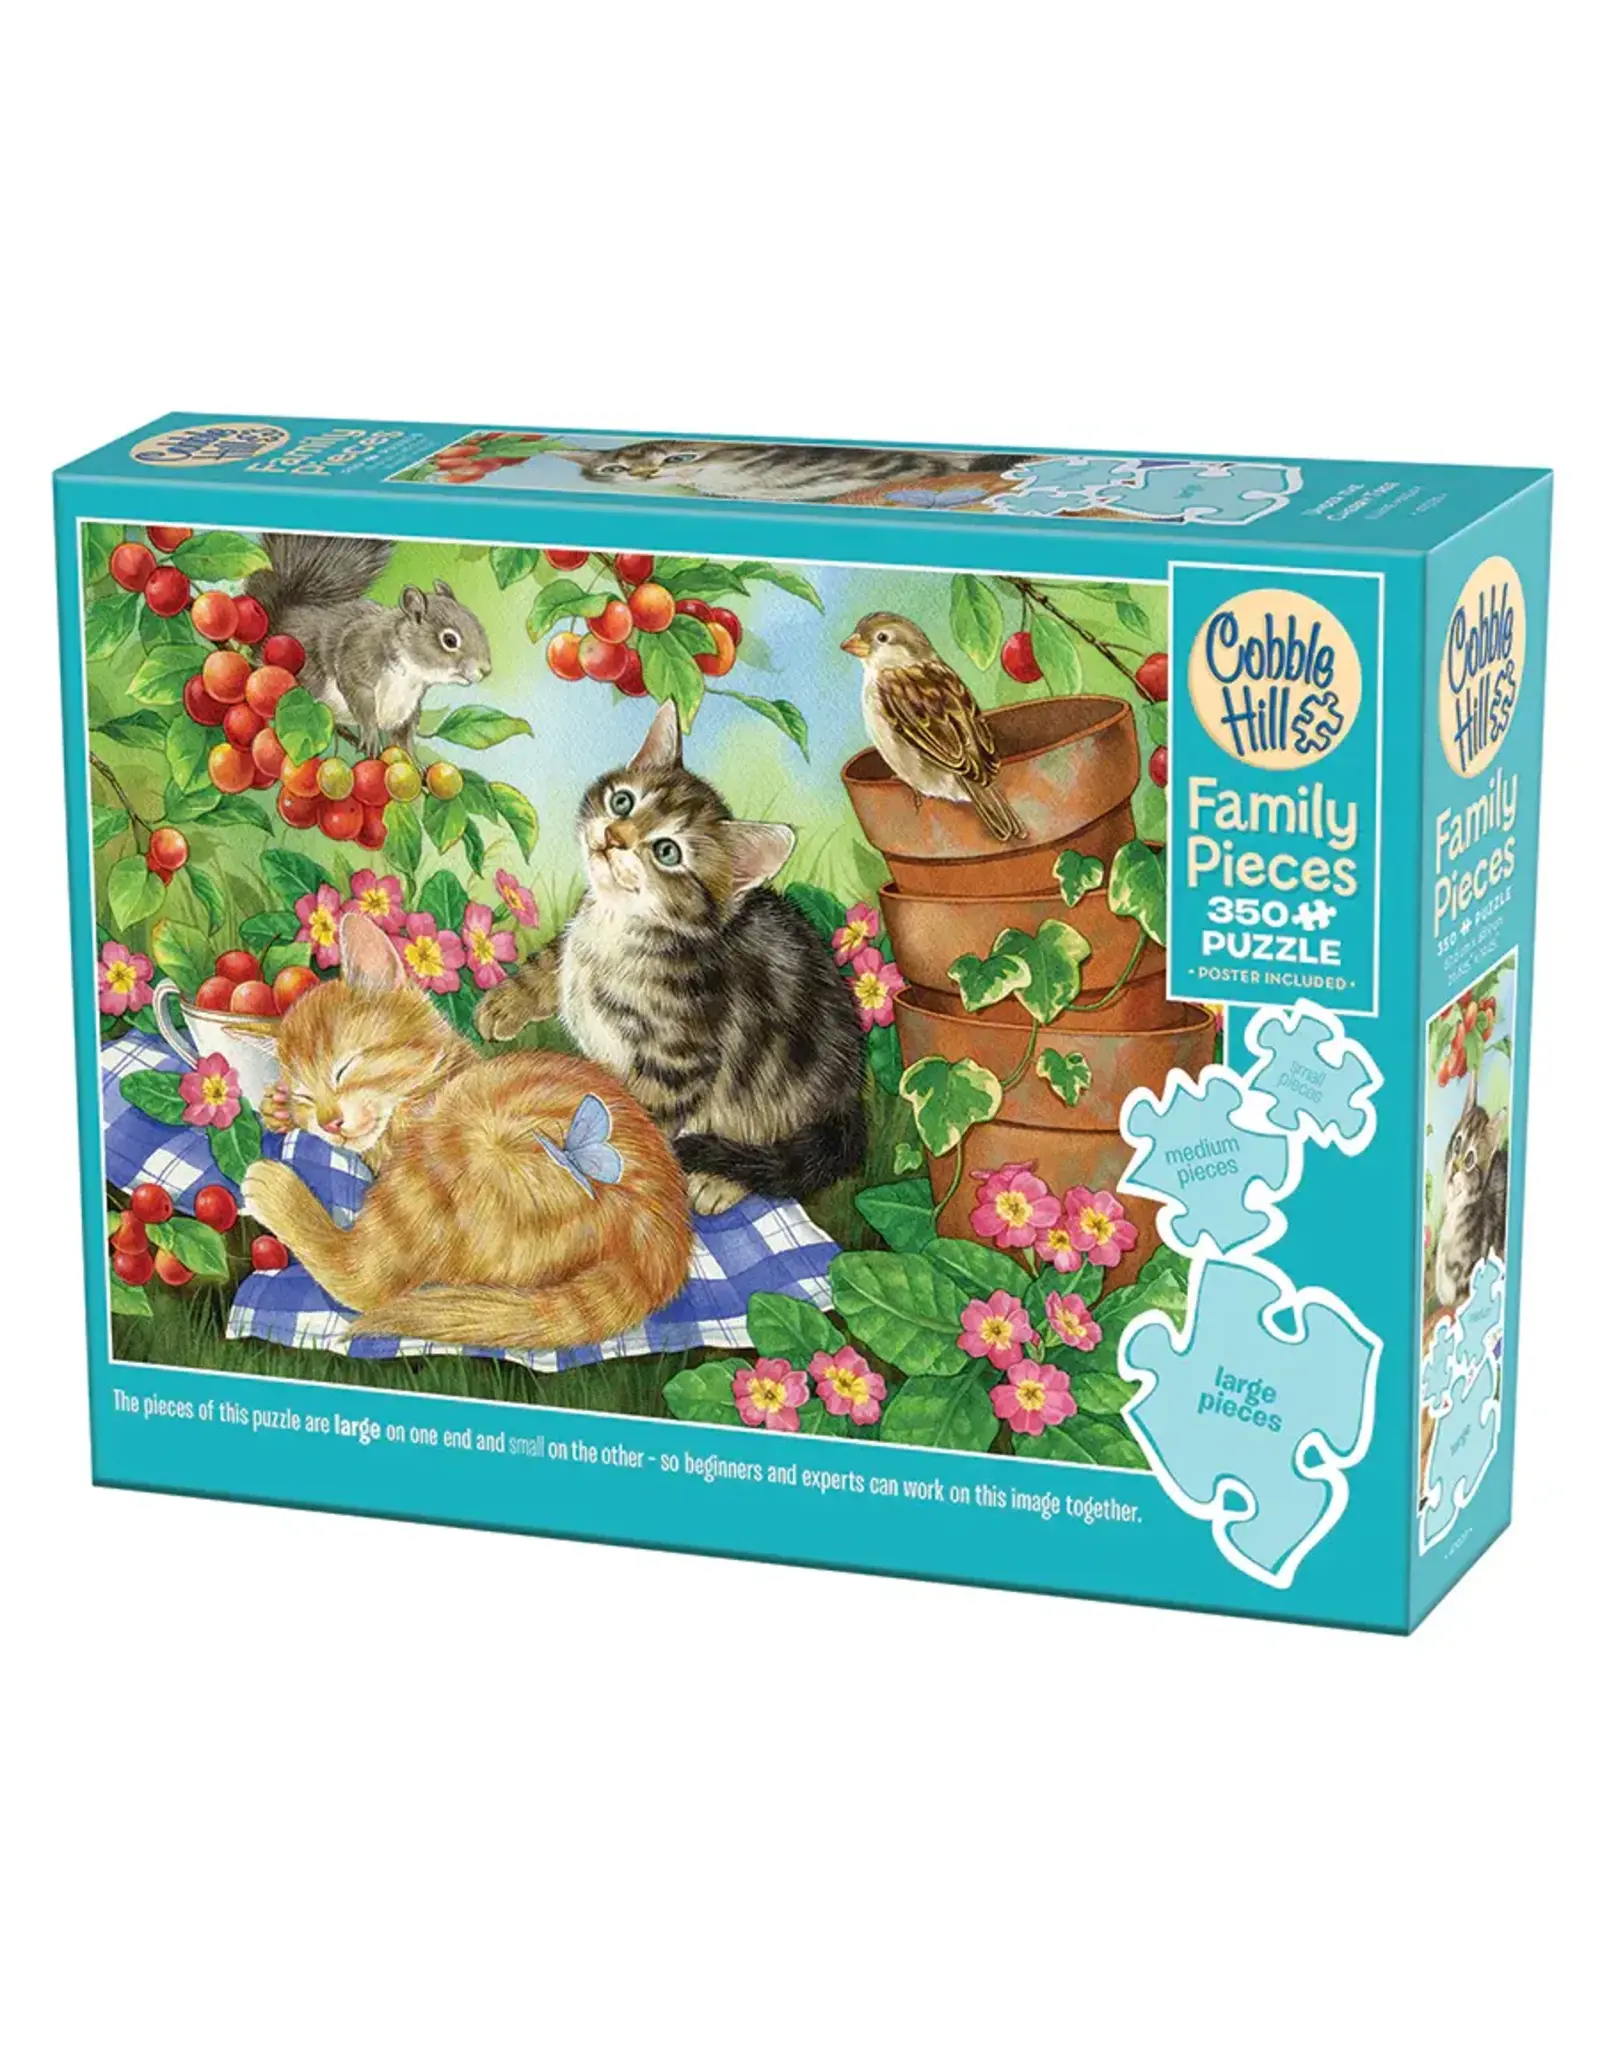 Cobble Hill Under the Cherry Tree 350pc Family Puzzle